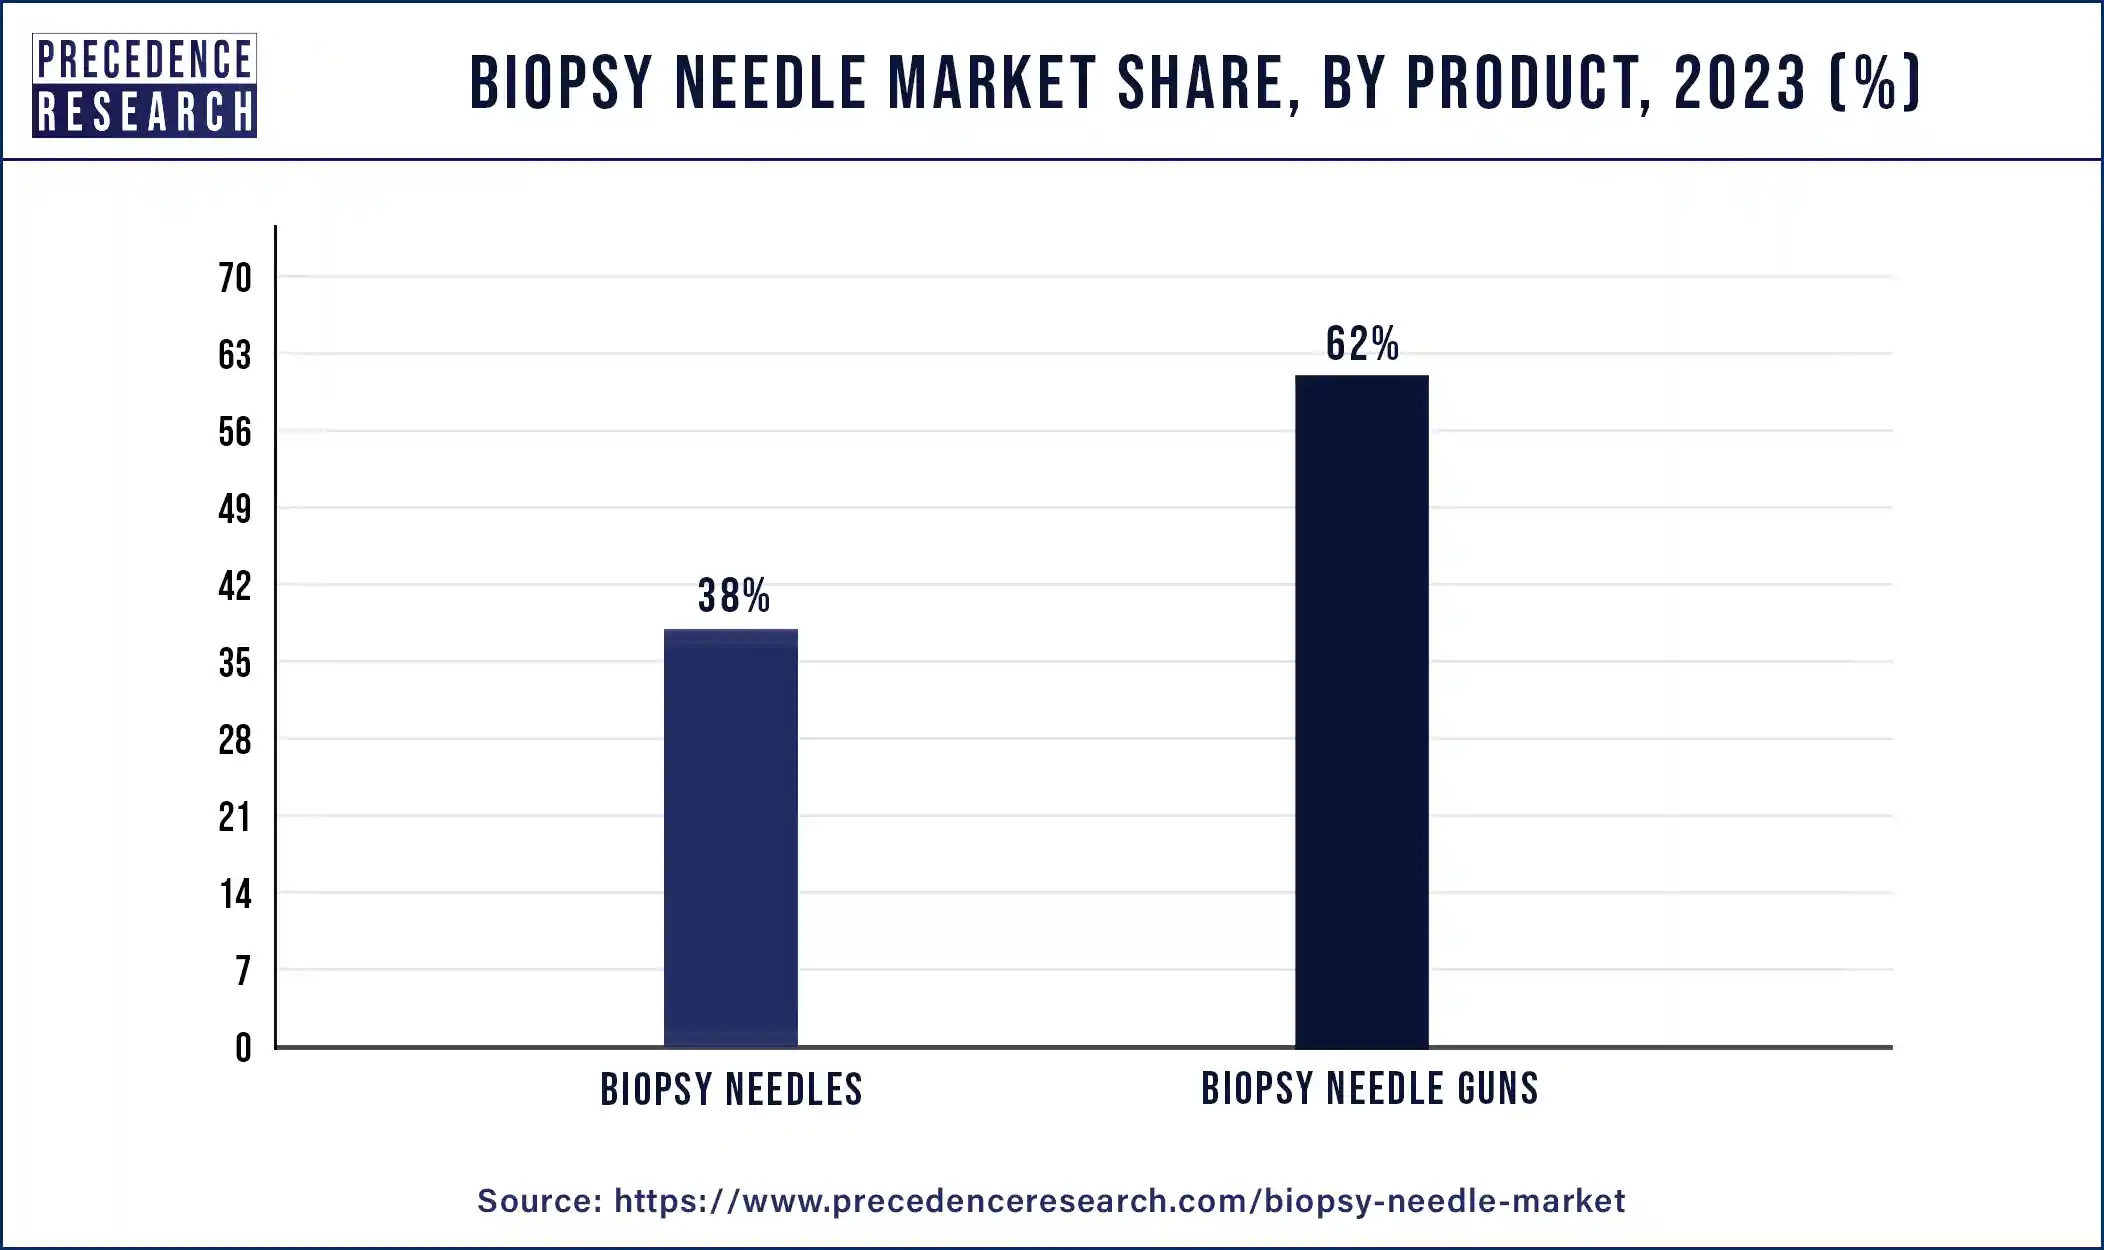 Biopsy Needle Market Share, By Product, 2023 (%)